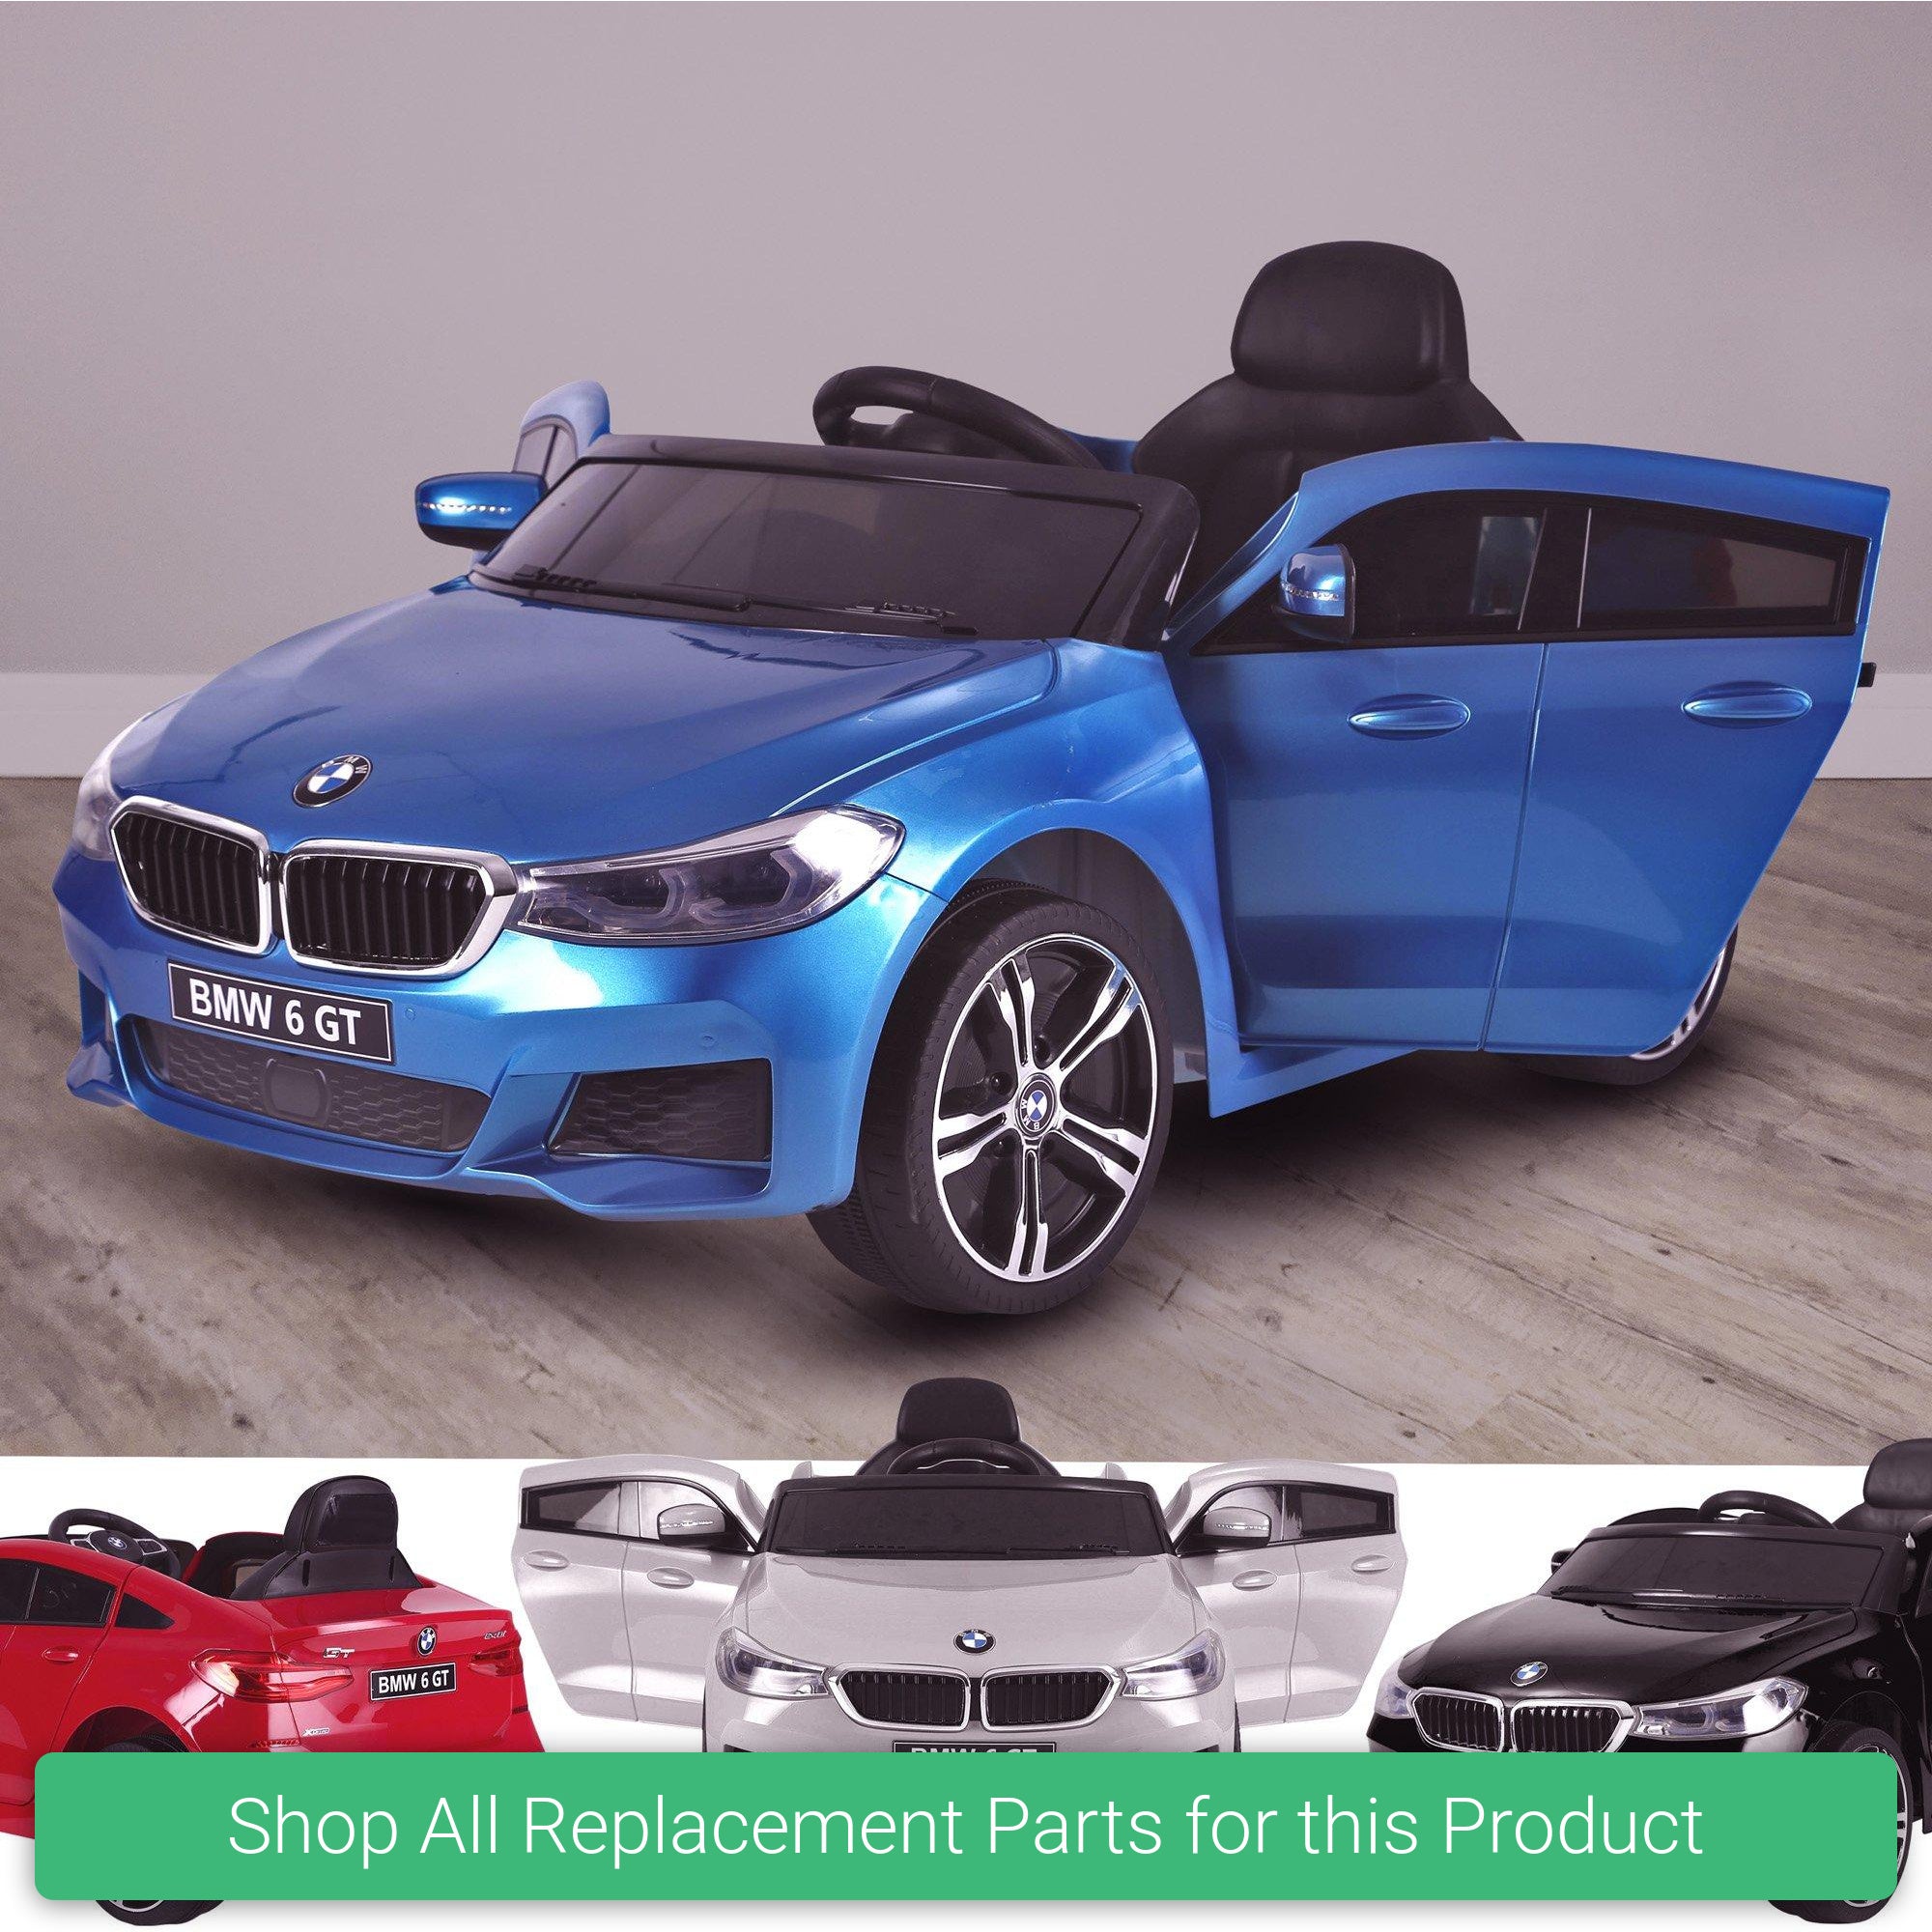 Replacement Parts and Spares for Kids BMW GT Licensed - BMW-GT-VARI - JJ2164